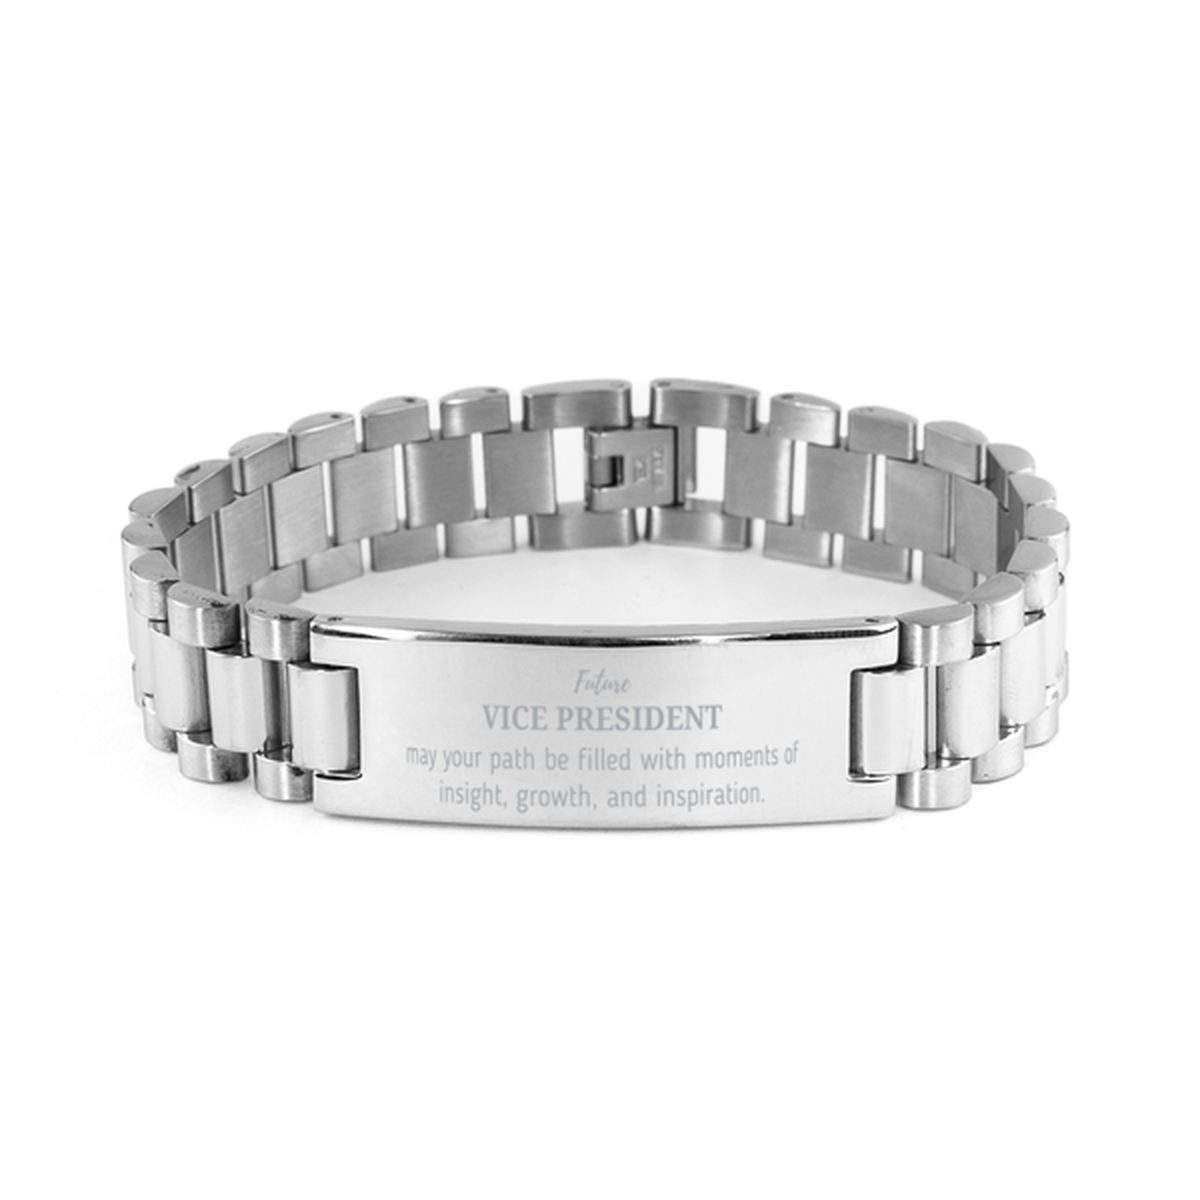 Future Vice President Gifts, May your path be filled with moments of insight, Graduation Gifts for New Vice President, Christmas Unique Ladder Stainless Steel Bracelet For Men, Women, Friends